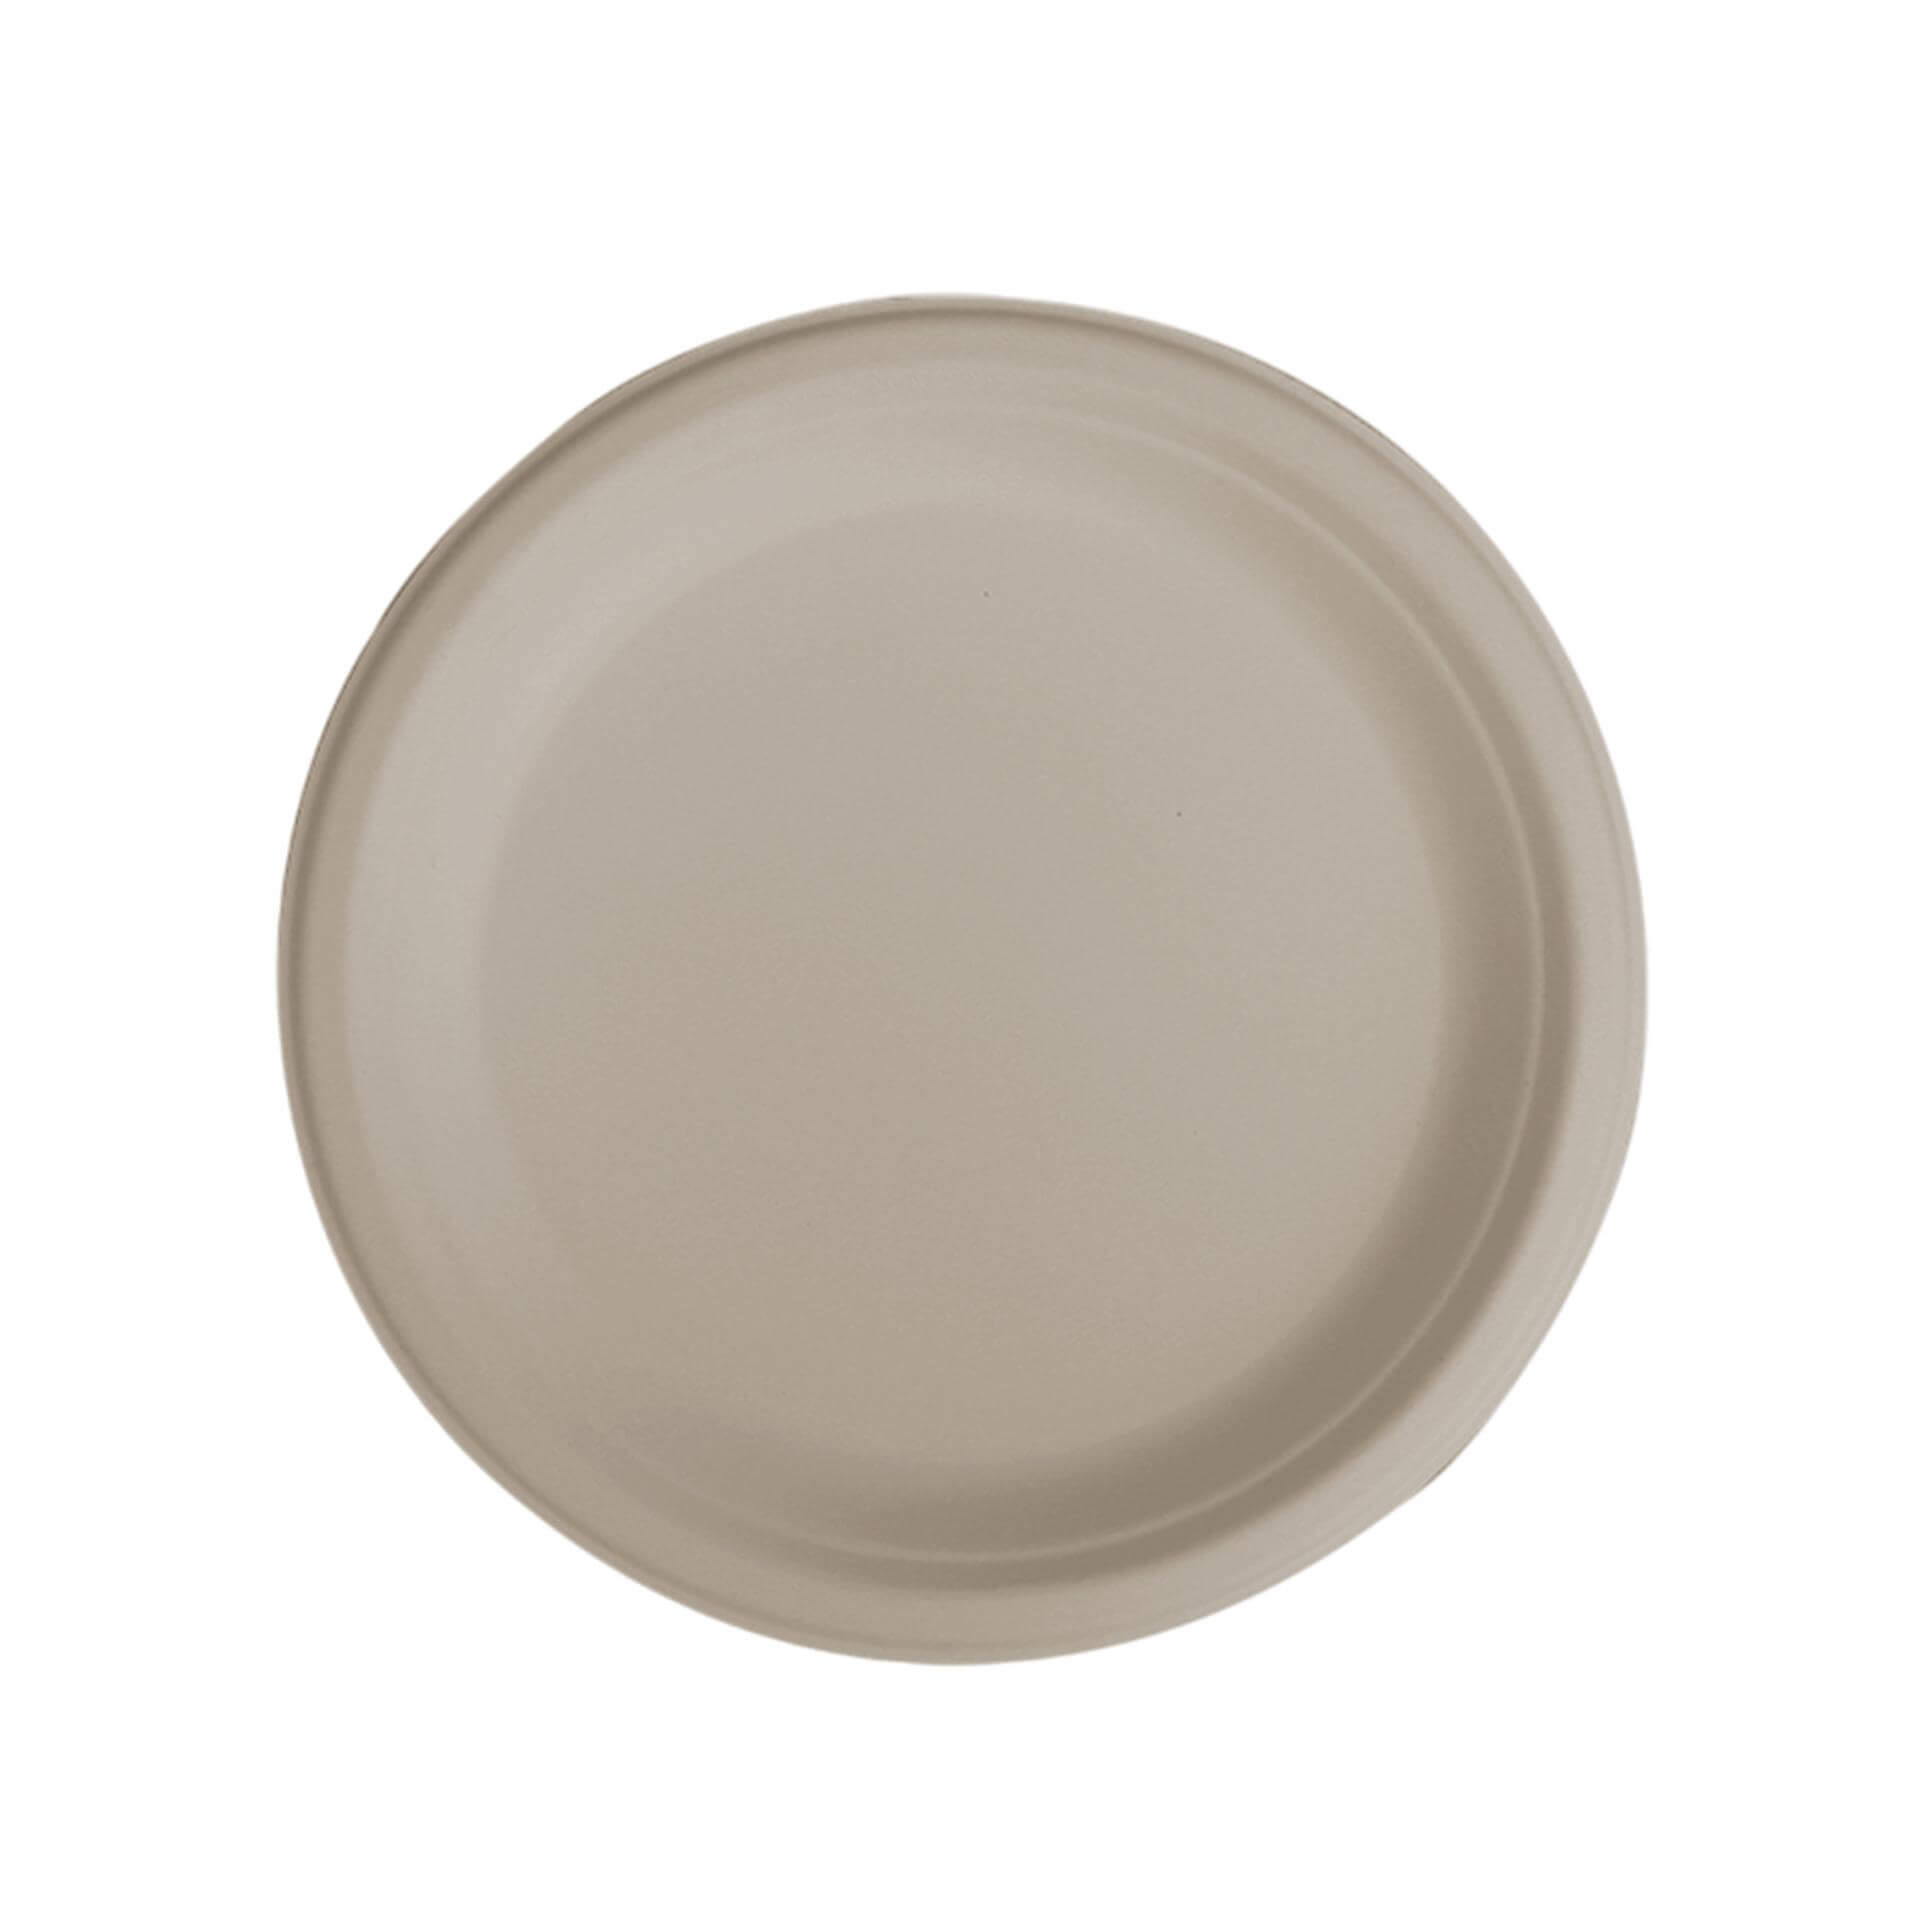 What is the difference between biodegradable plates and utensils and compostable meals